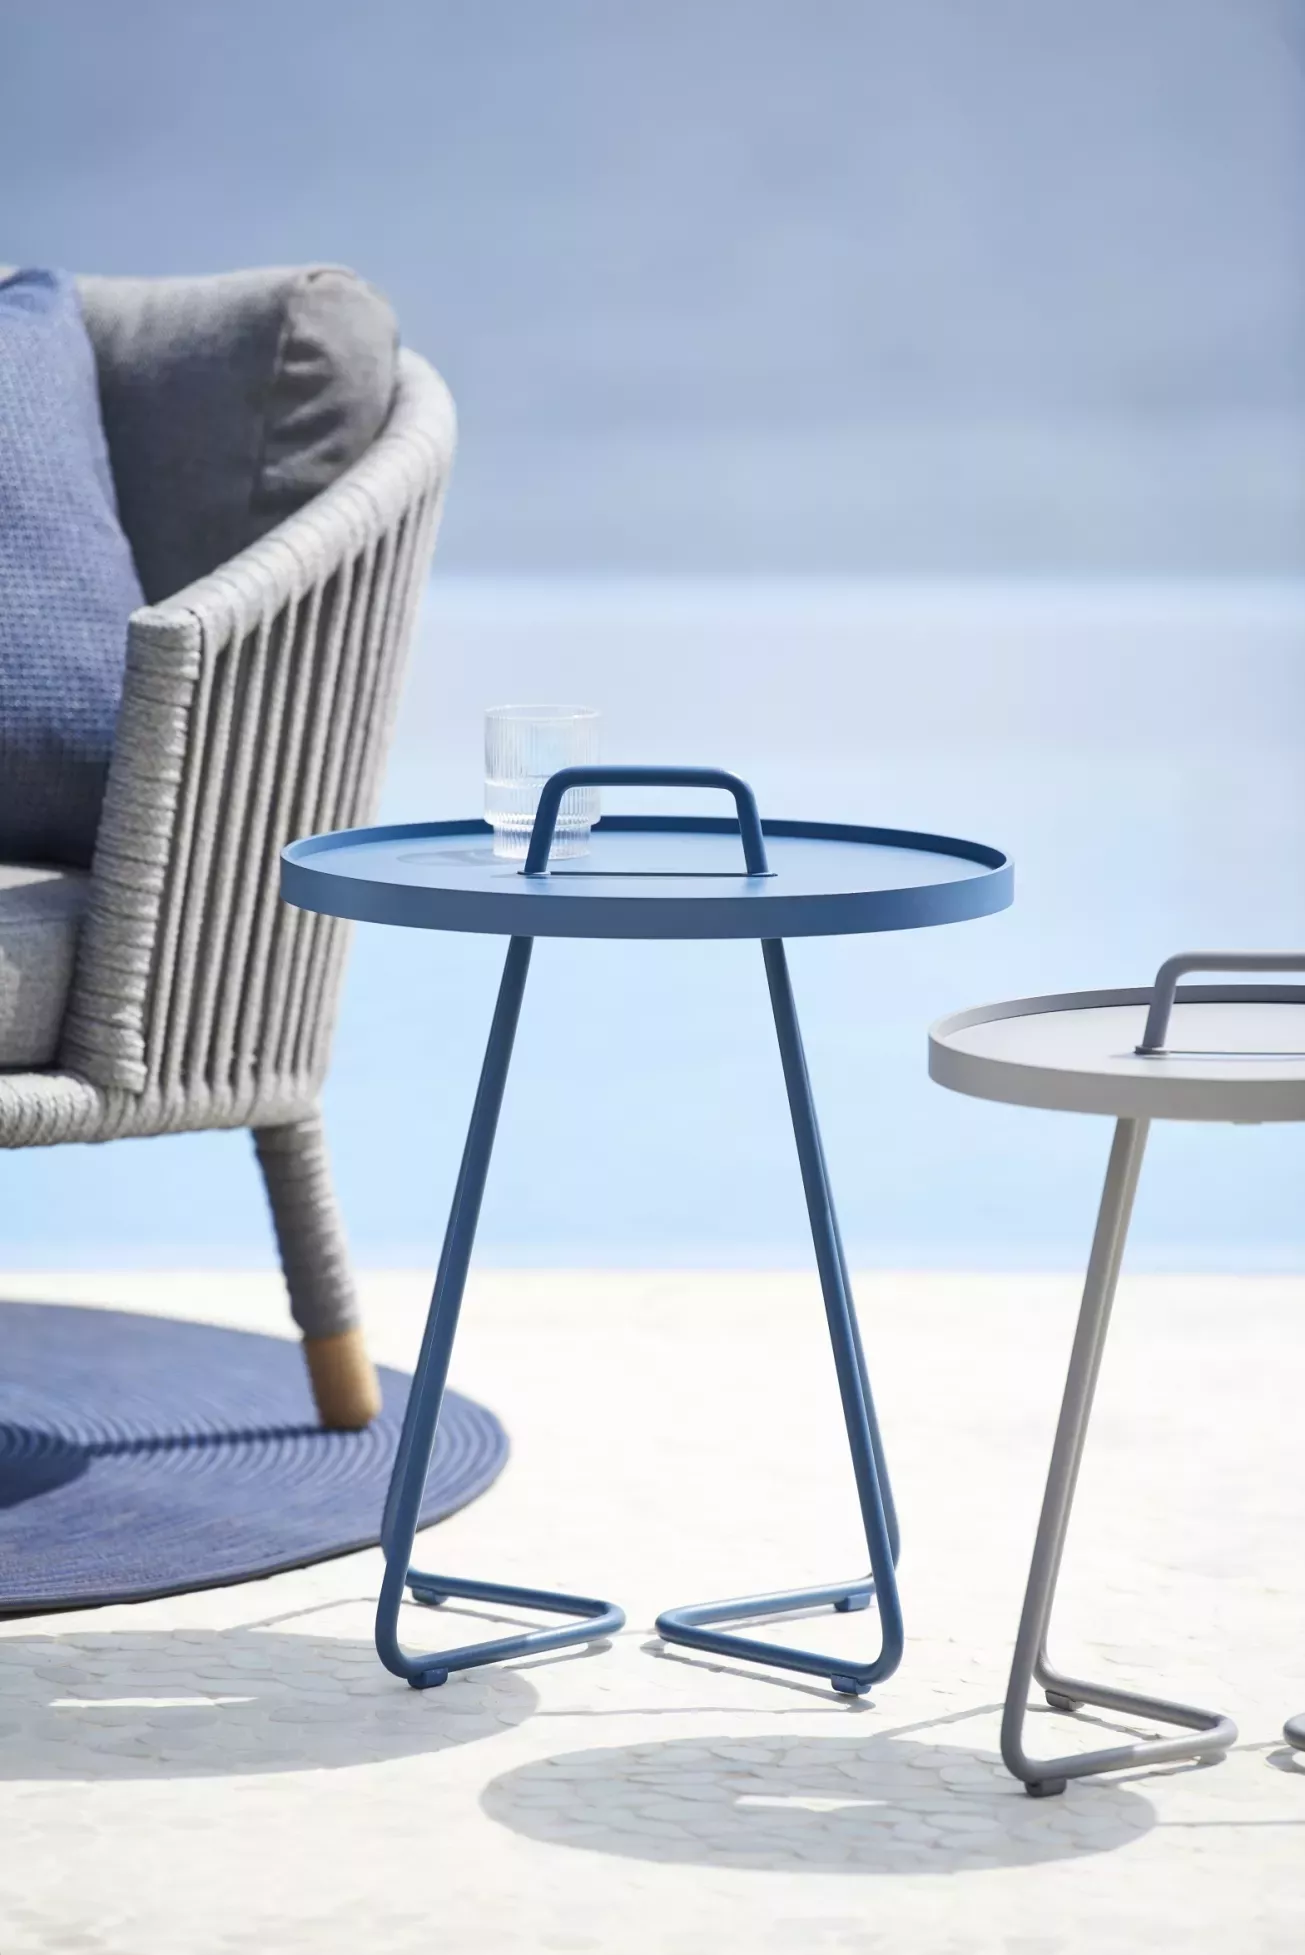 the move table cane line furniture metal webp small outdoor accent side providing easy movement caneline canelineoutdoorfurniture luxuryfurniture white acrylic nest tables ocean